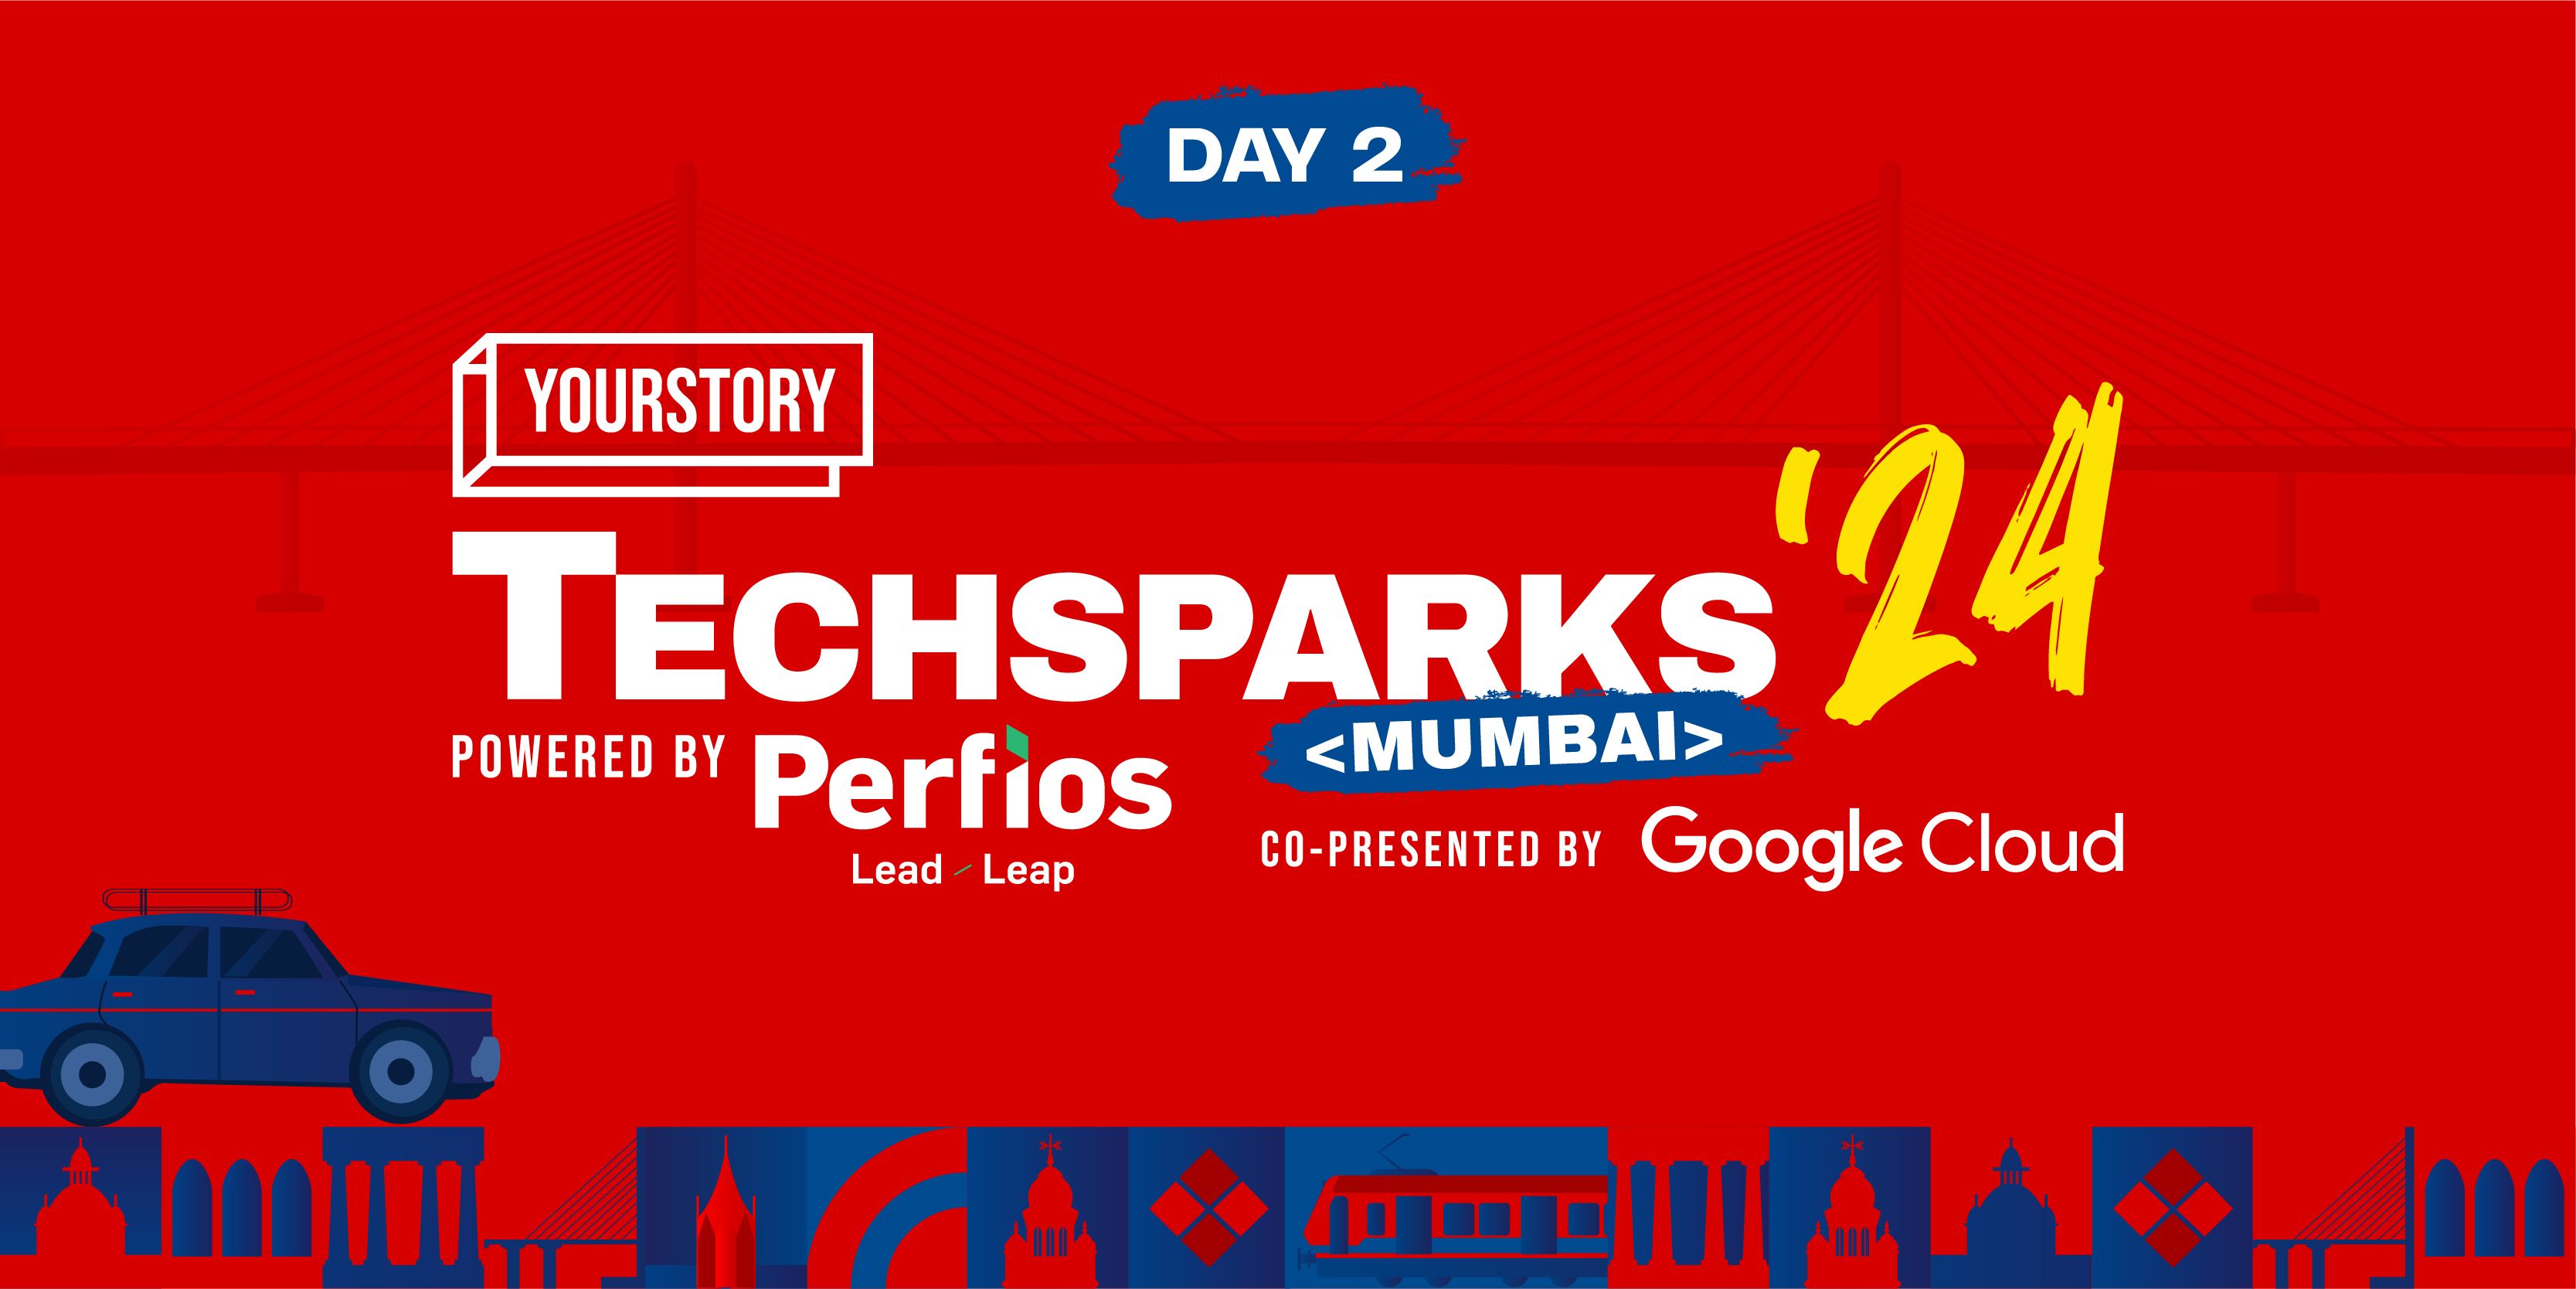 Shark, sparks, and stories: Day 2 at TechSparks Mumbai promises a blockbuster show